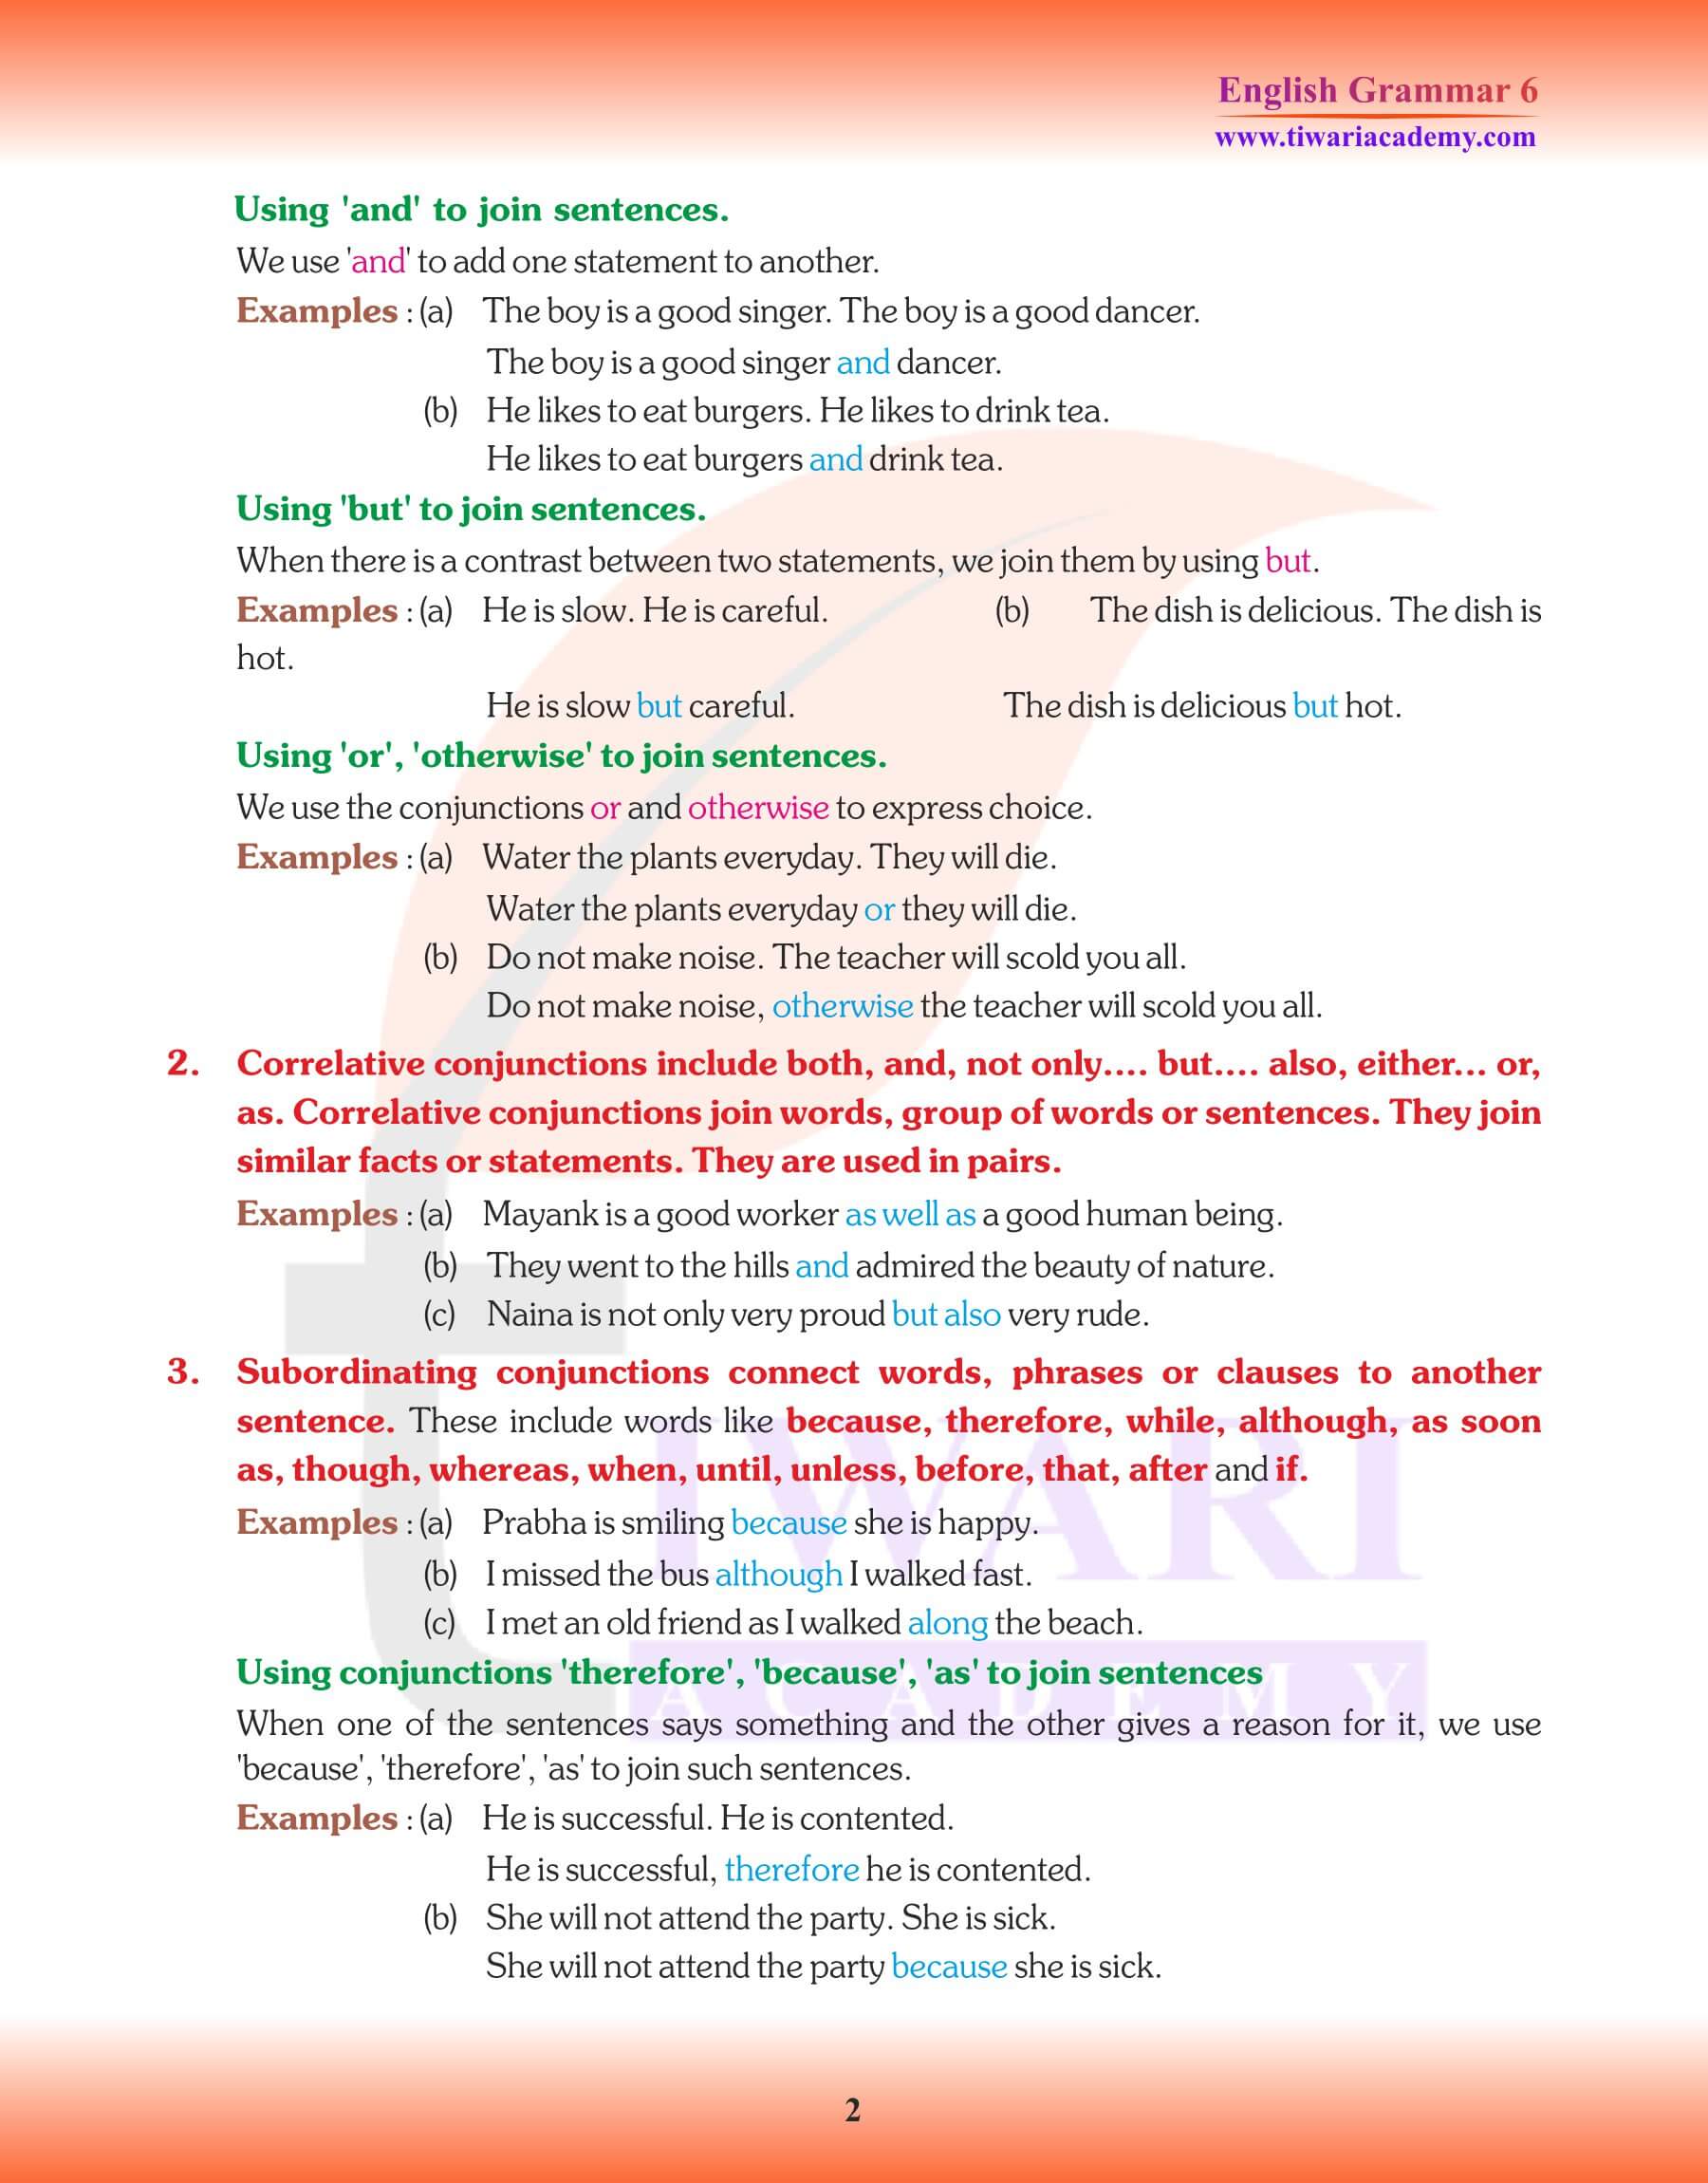 Class 6 English Grammar Conjunction notes